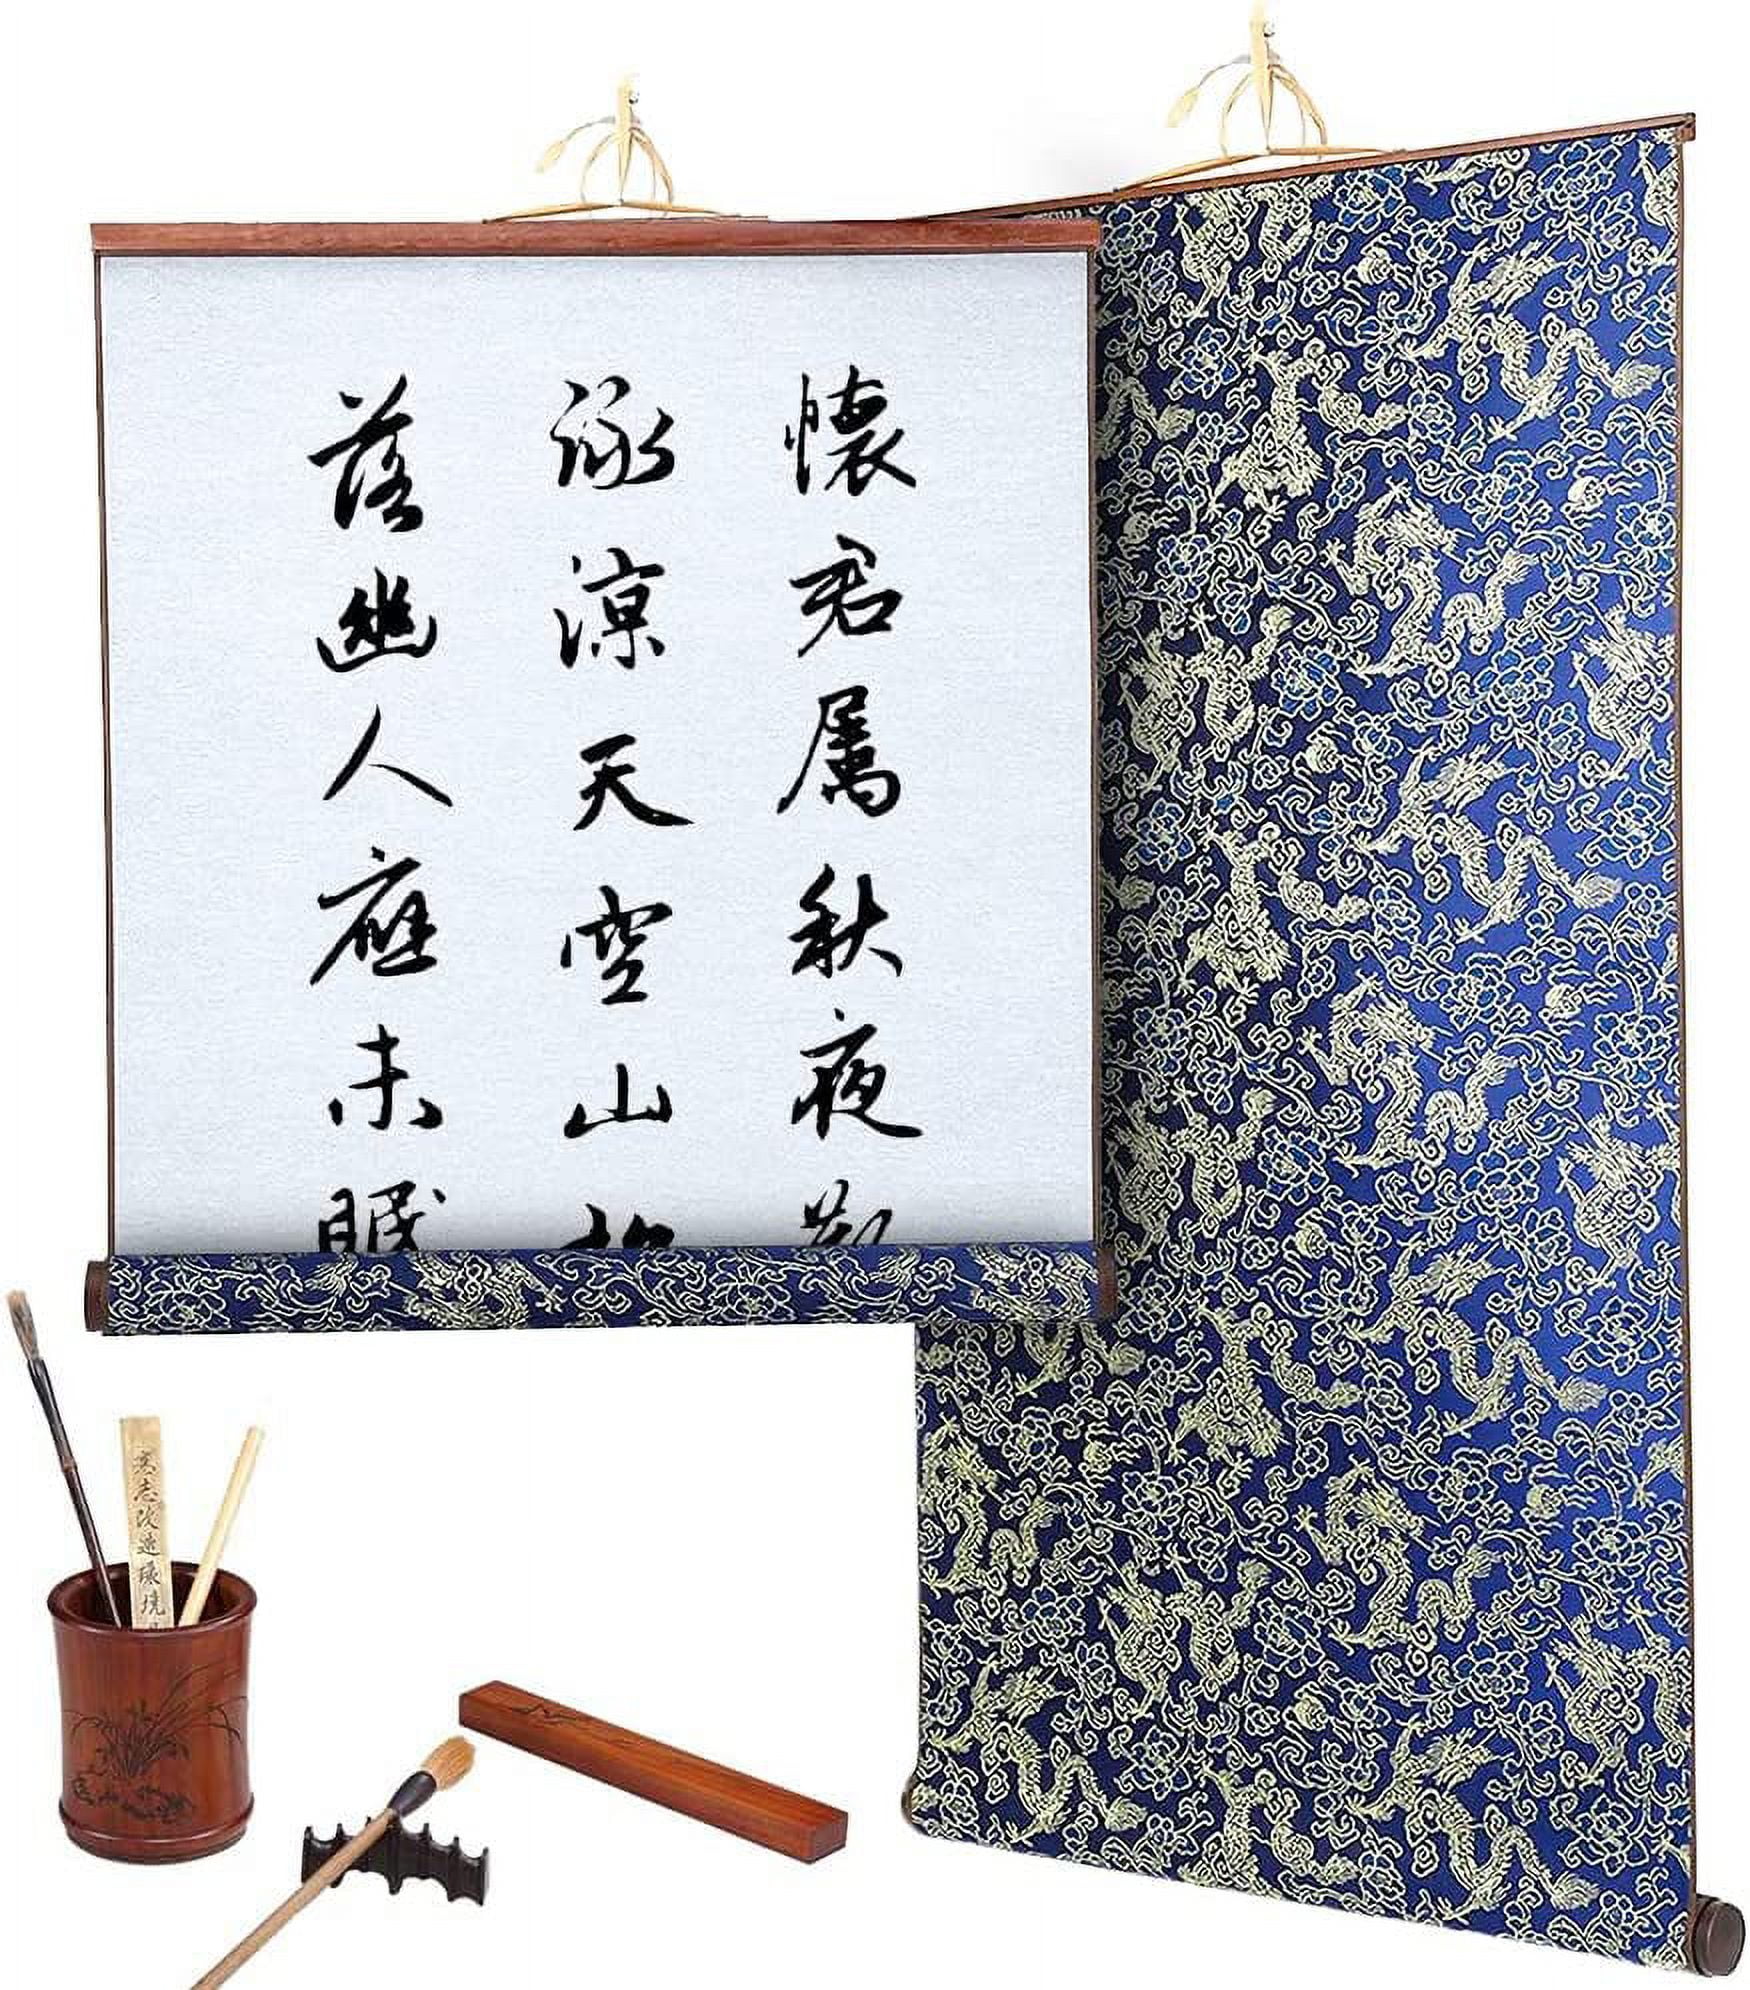 OUNONA 50 Sheets of Chinese Calligraphy Brush Ink Writing / Xuan Paper/  Rice Paper for Chinese Calligraphy Brush Writing Sumi Set 